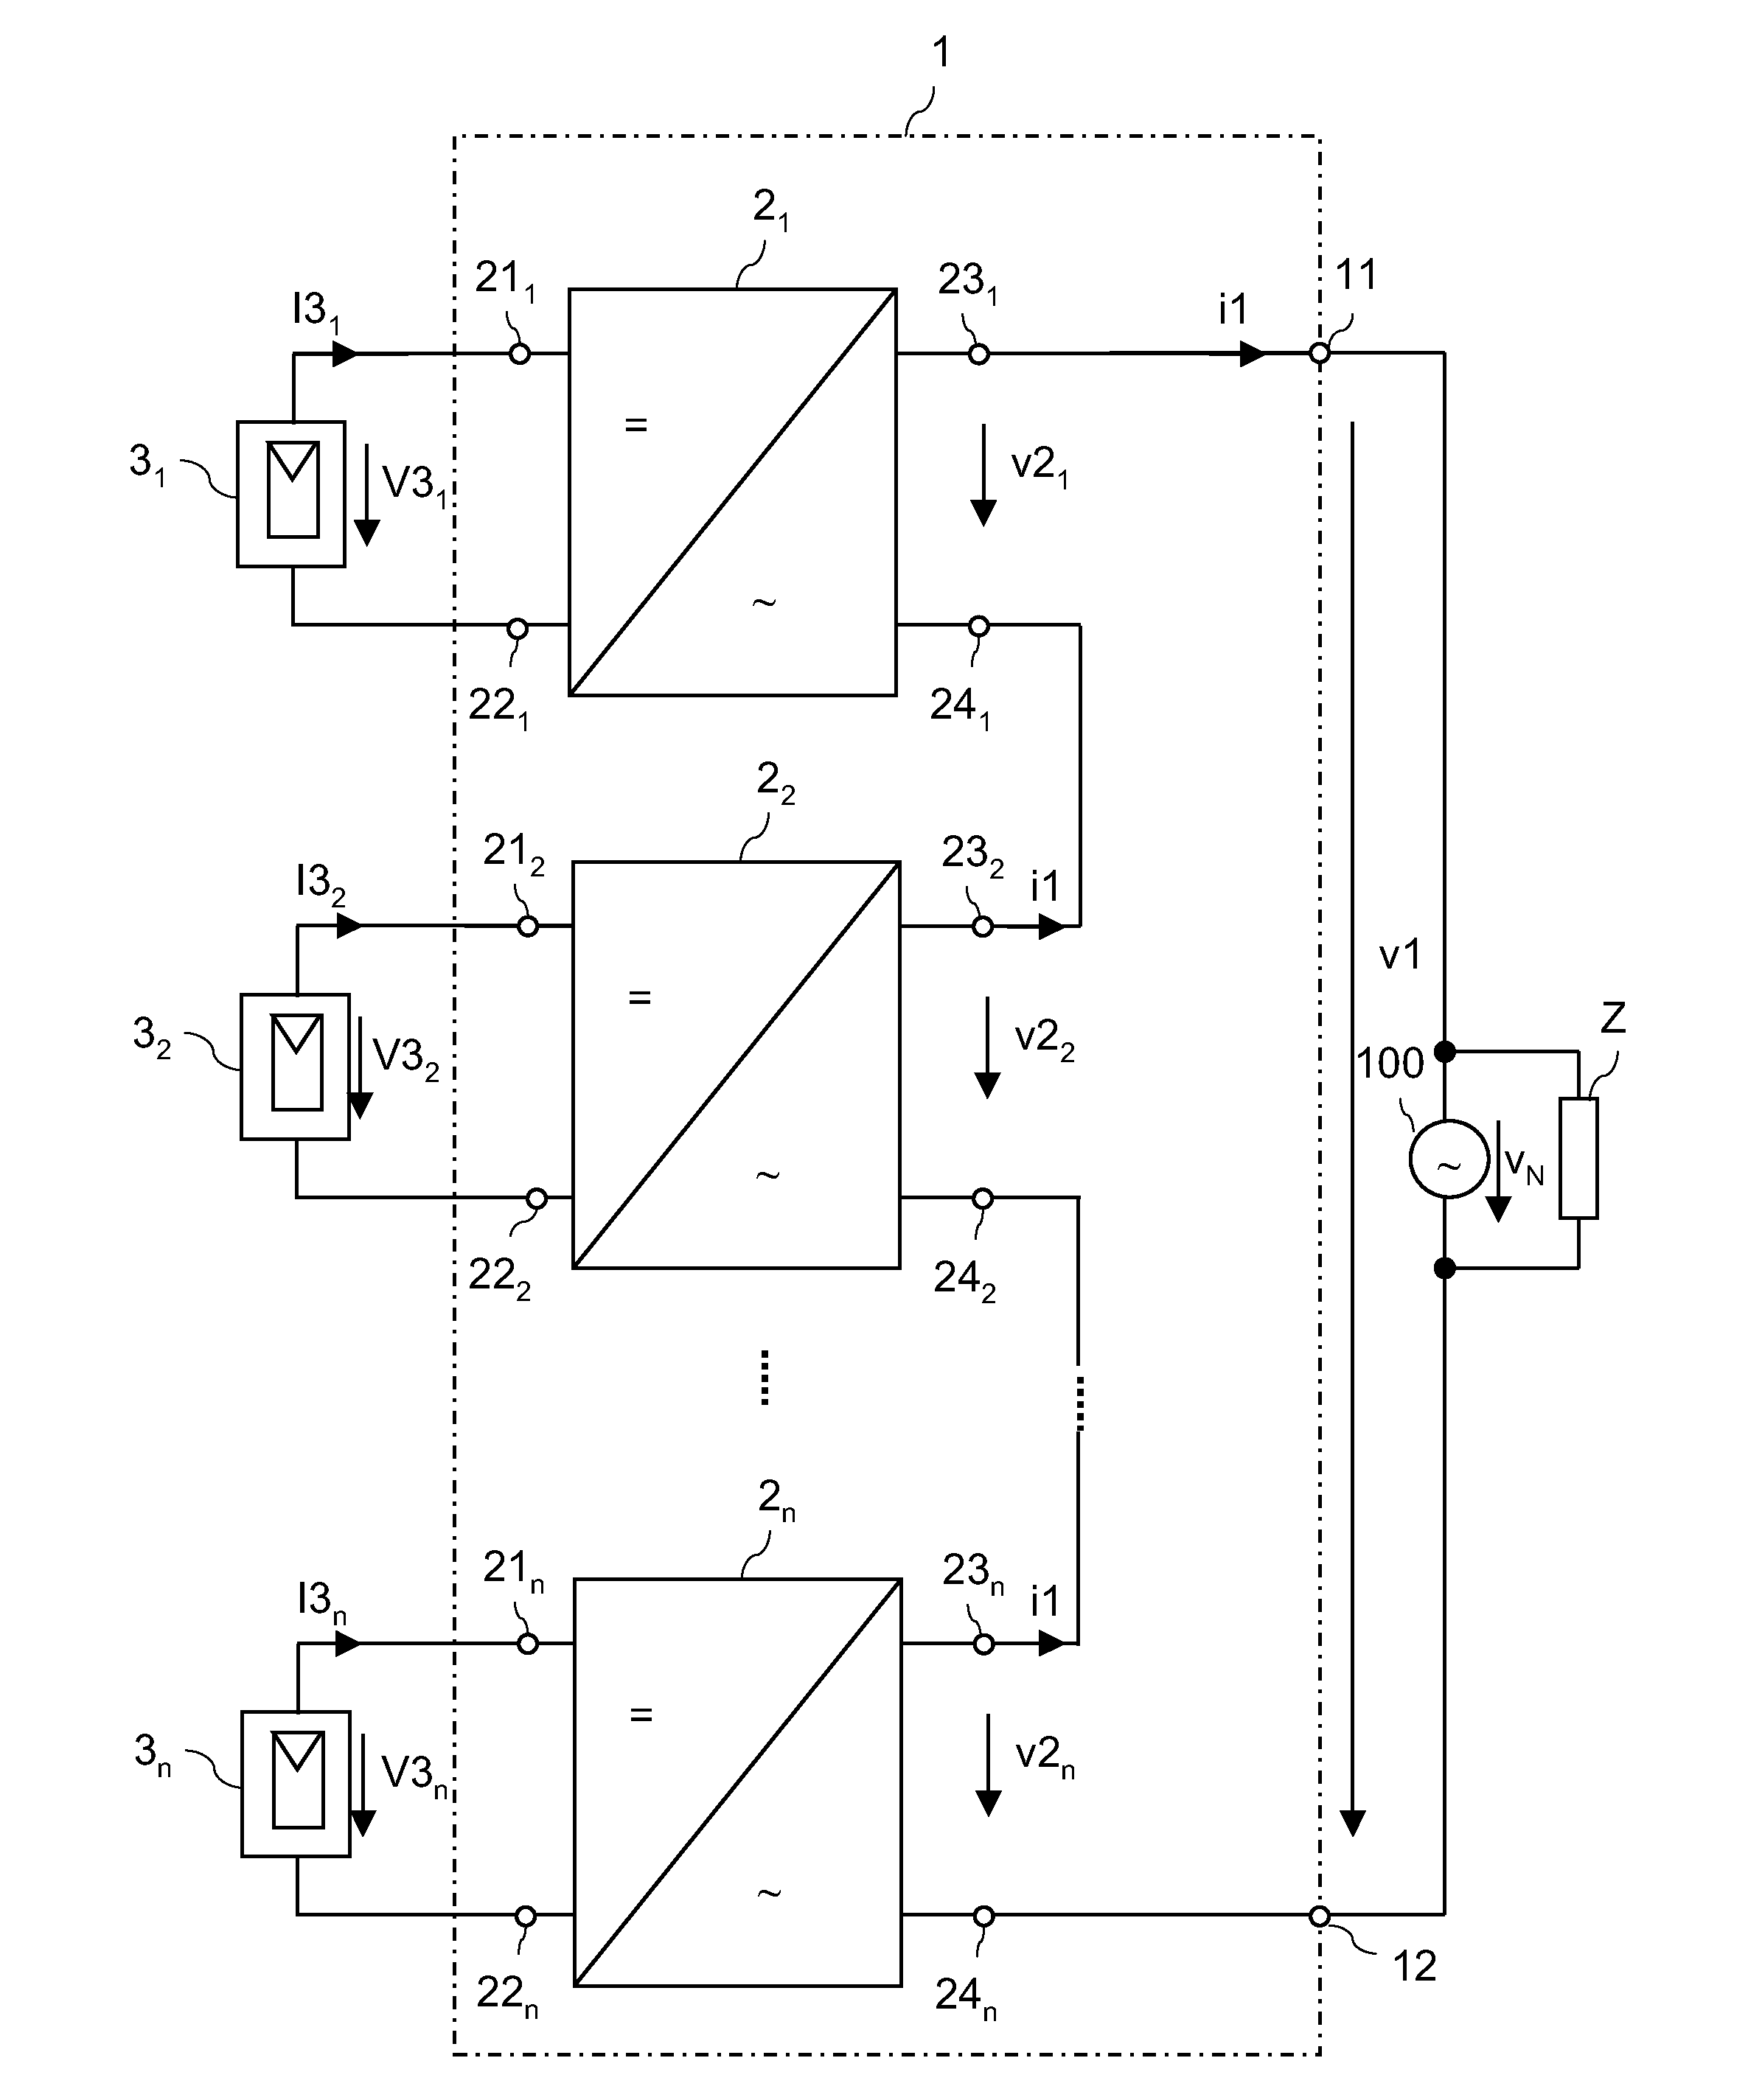 Power Converter Circuit with AC Output